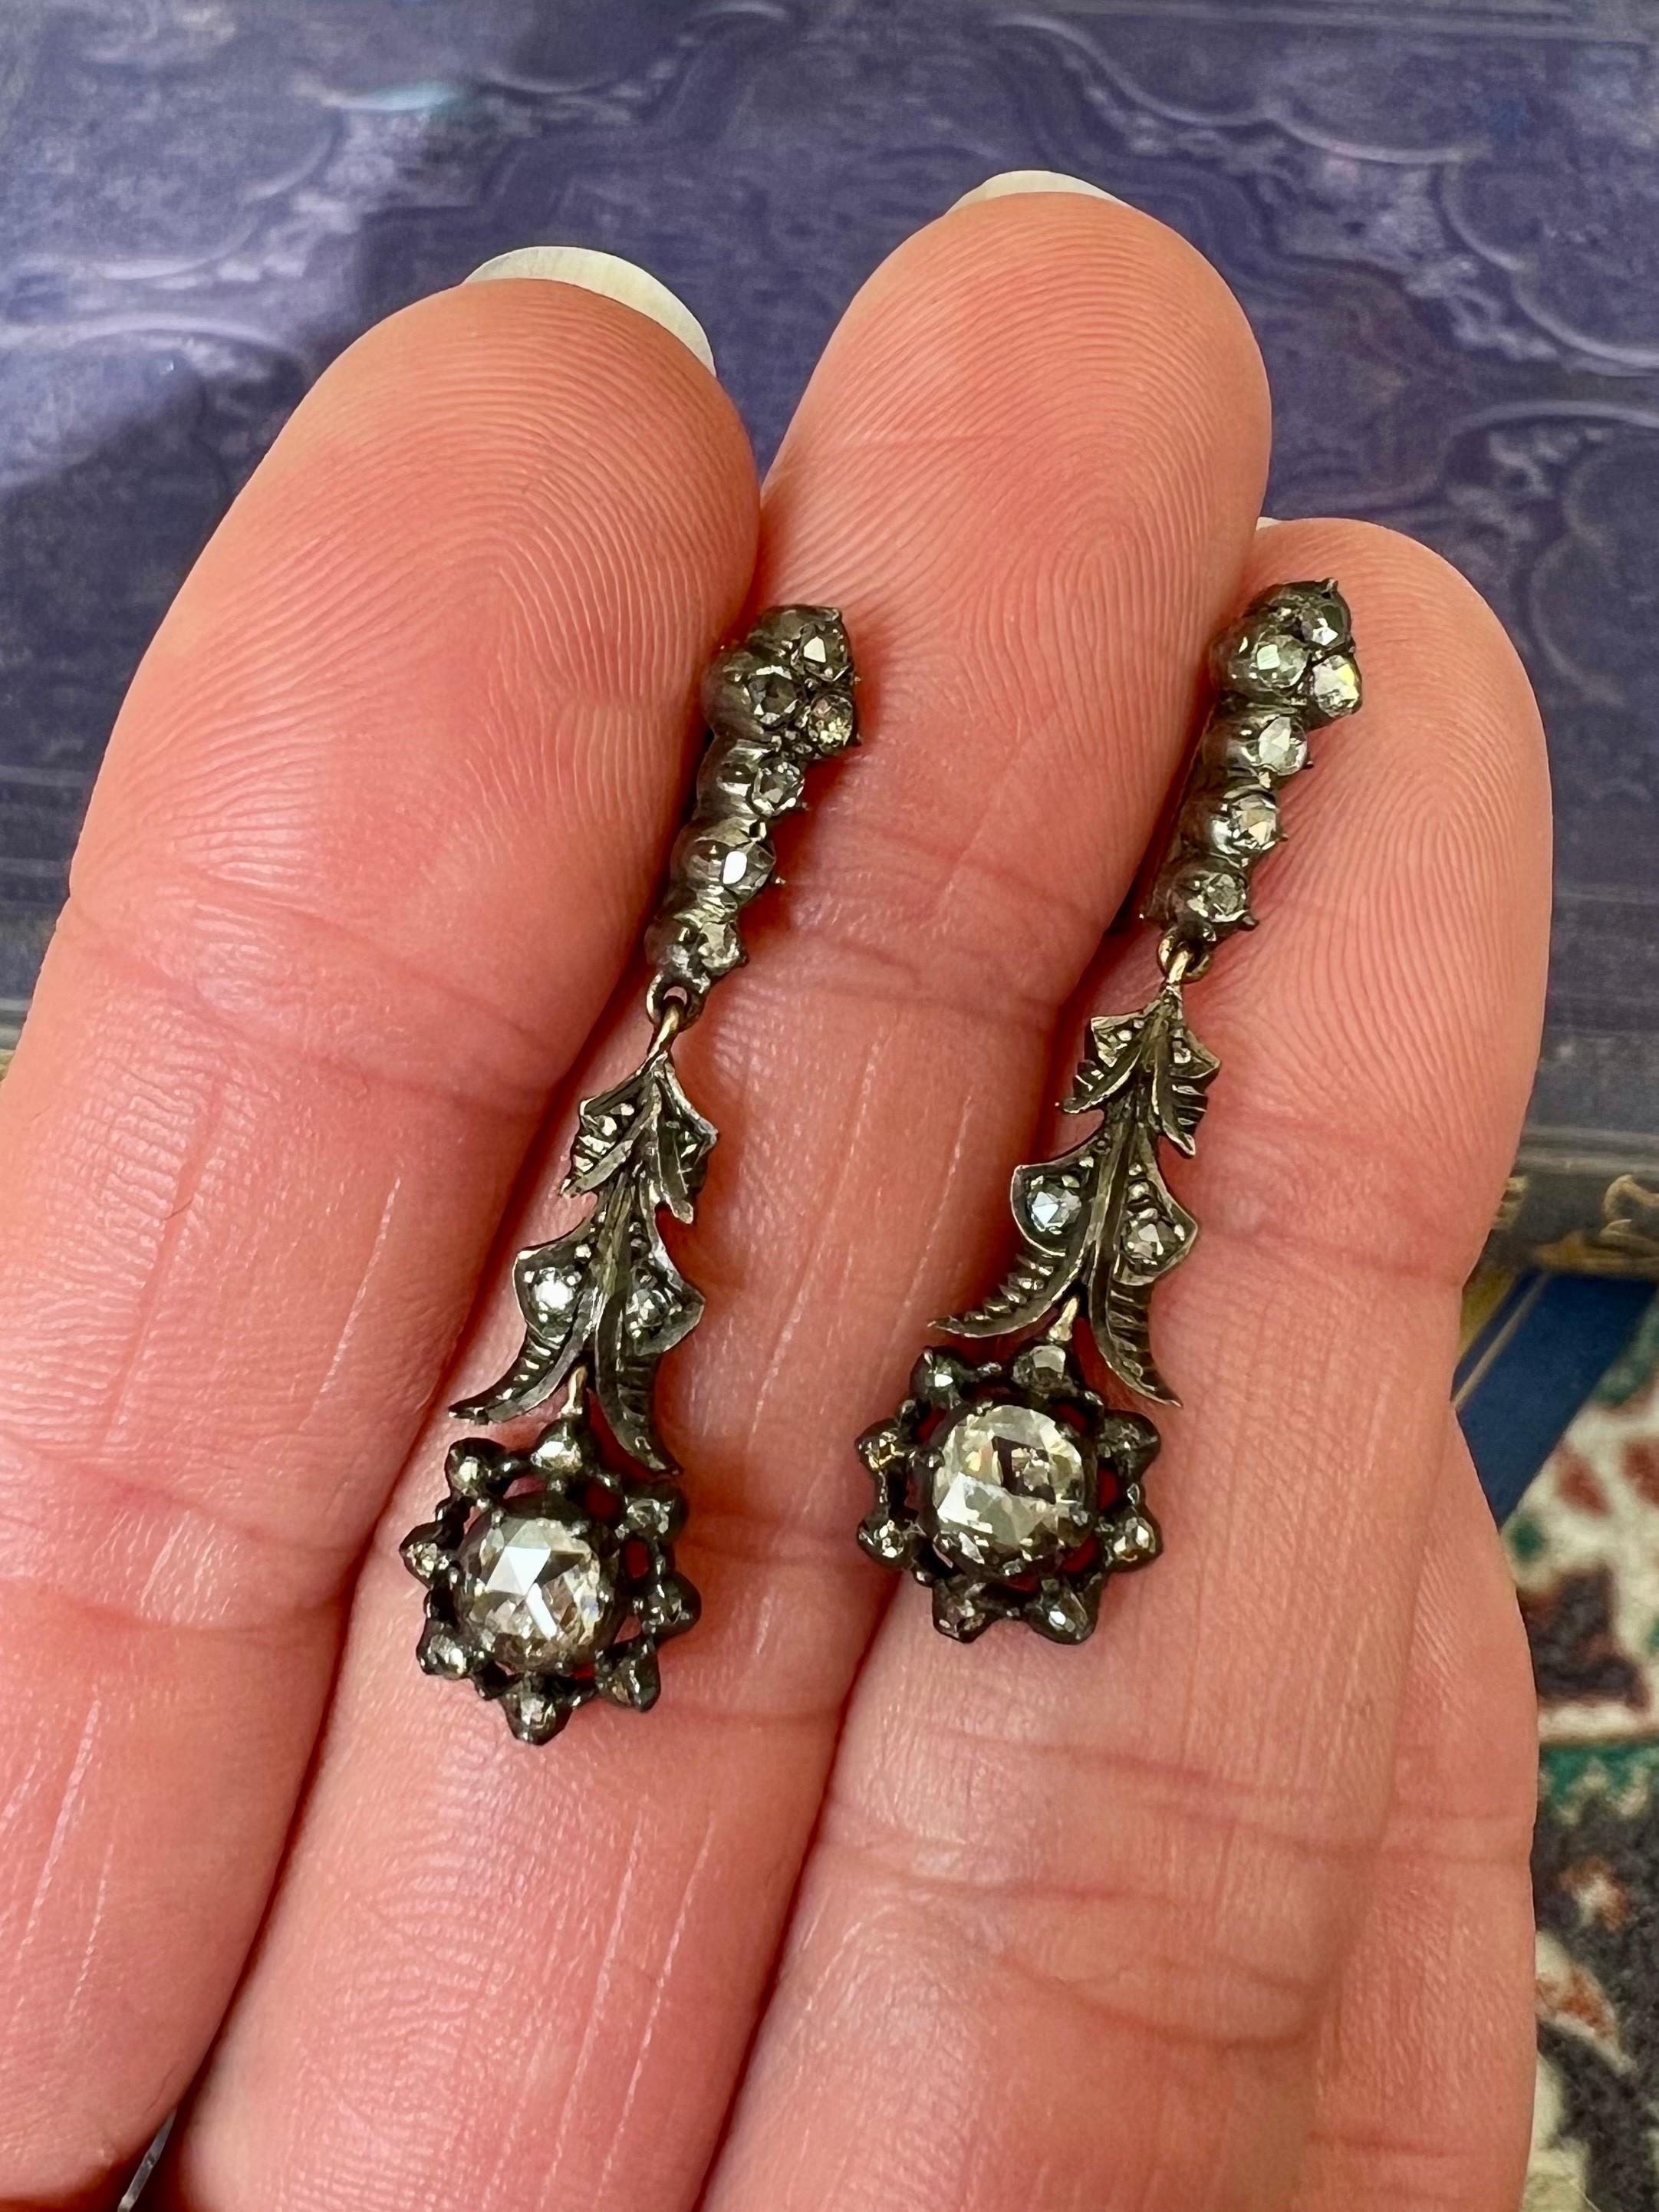 An antique 19th century pair of yellow gold earrings set with rose cut diamonds crafted in a silver setting. These antique Dutch dangle earrings have a beautiful design with leaves and a flower with a large diamond in the middle - while the stem and